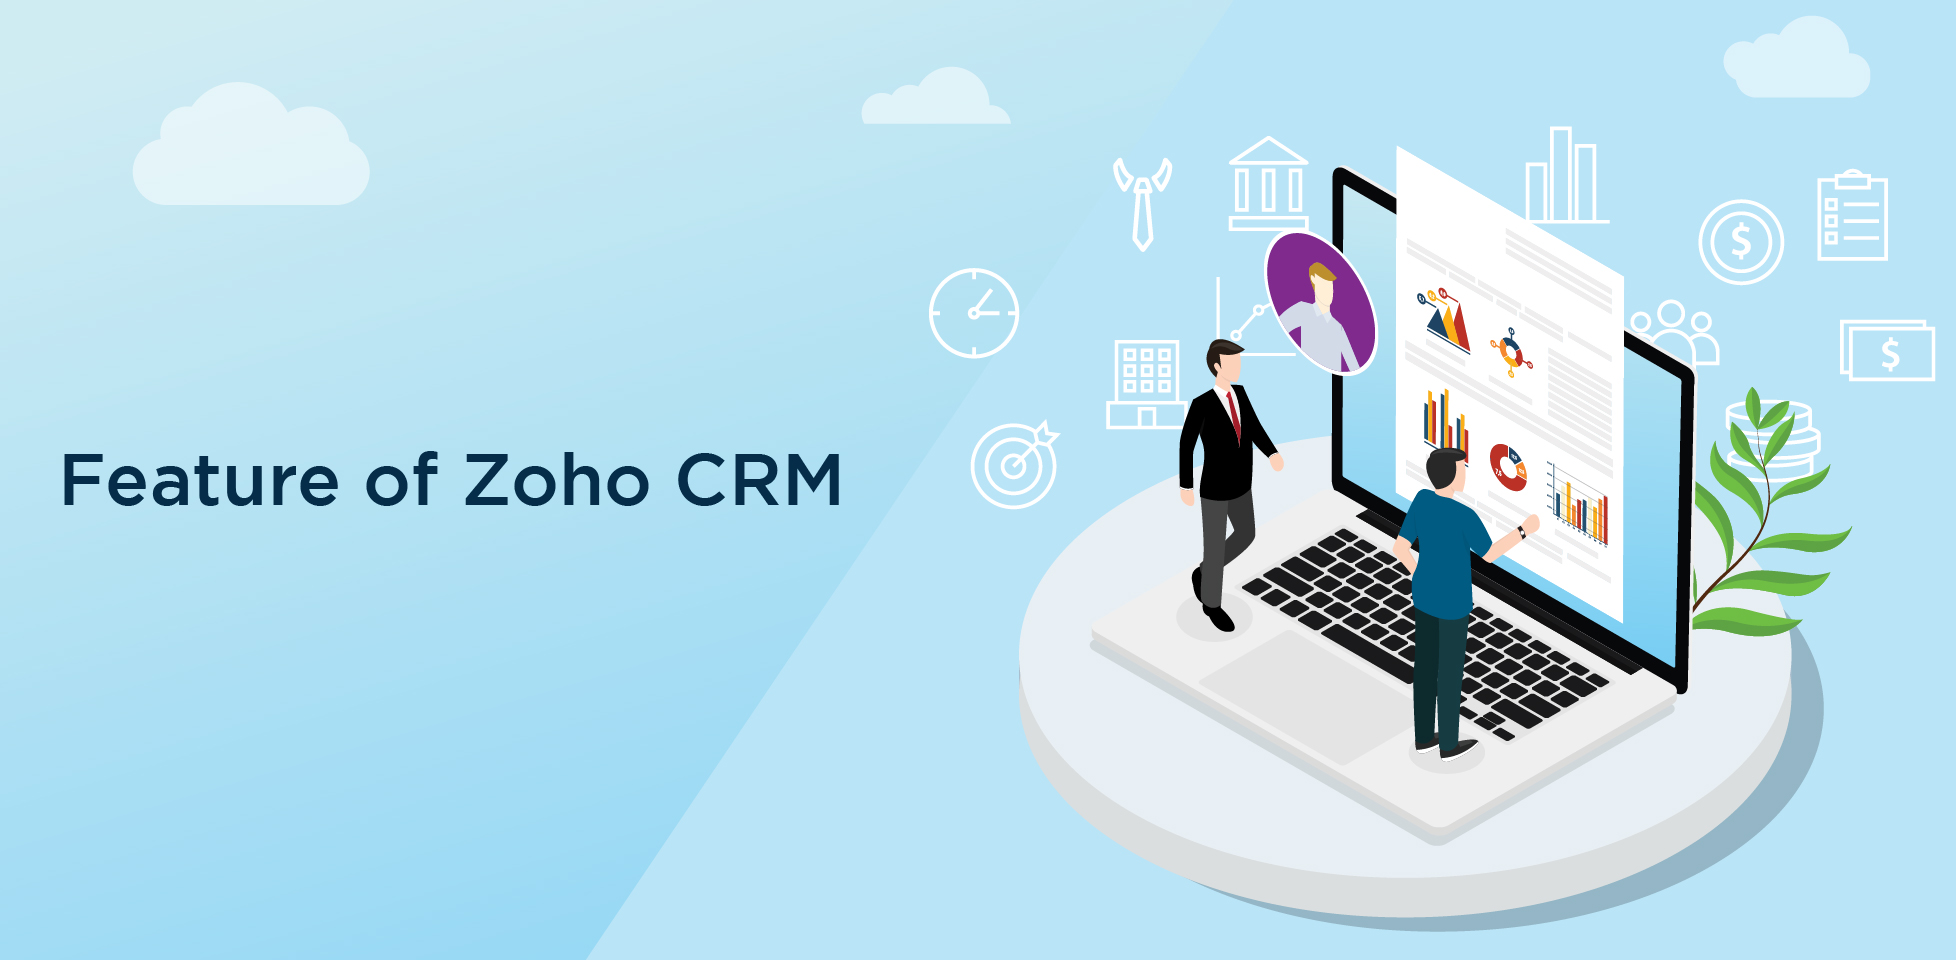 Feature of Zoho CRM